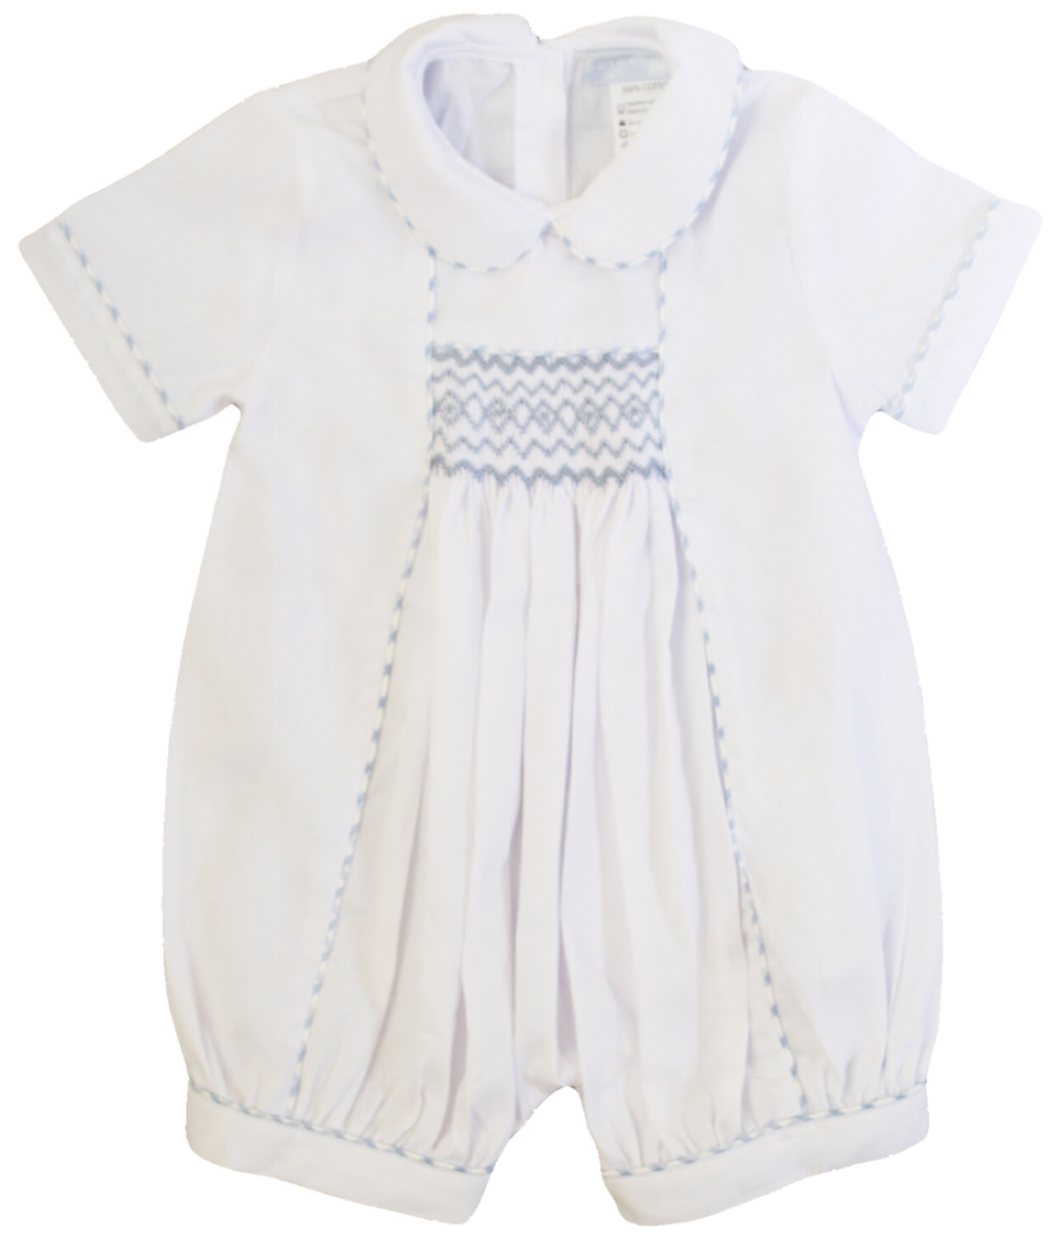 The Smocked Shortie - Ivory/Blue Gingham